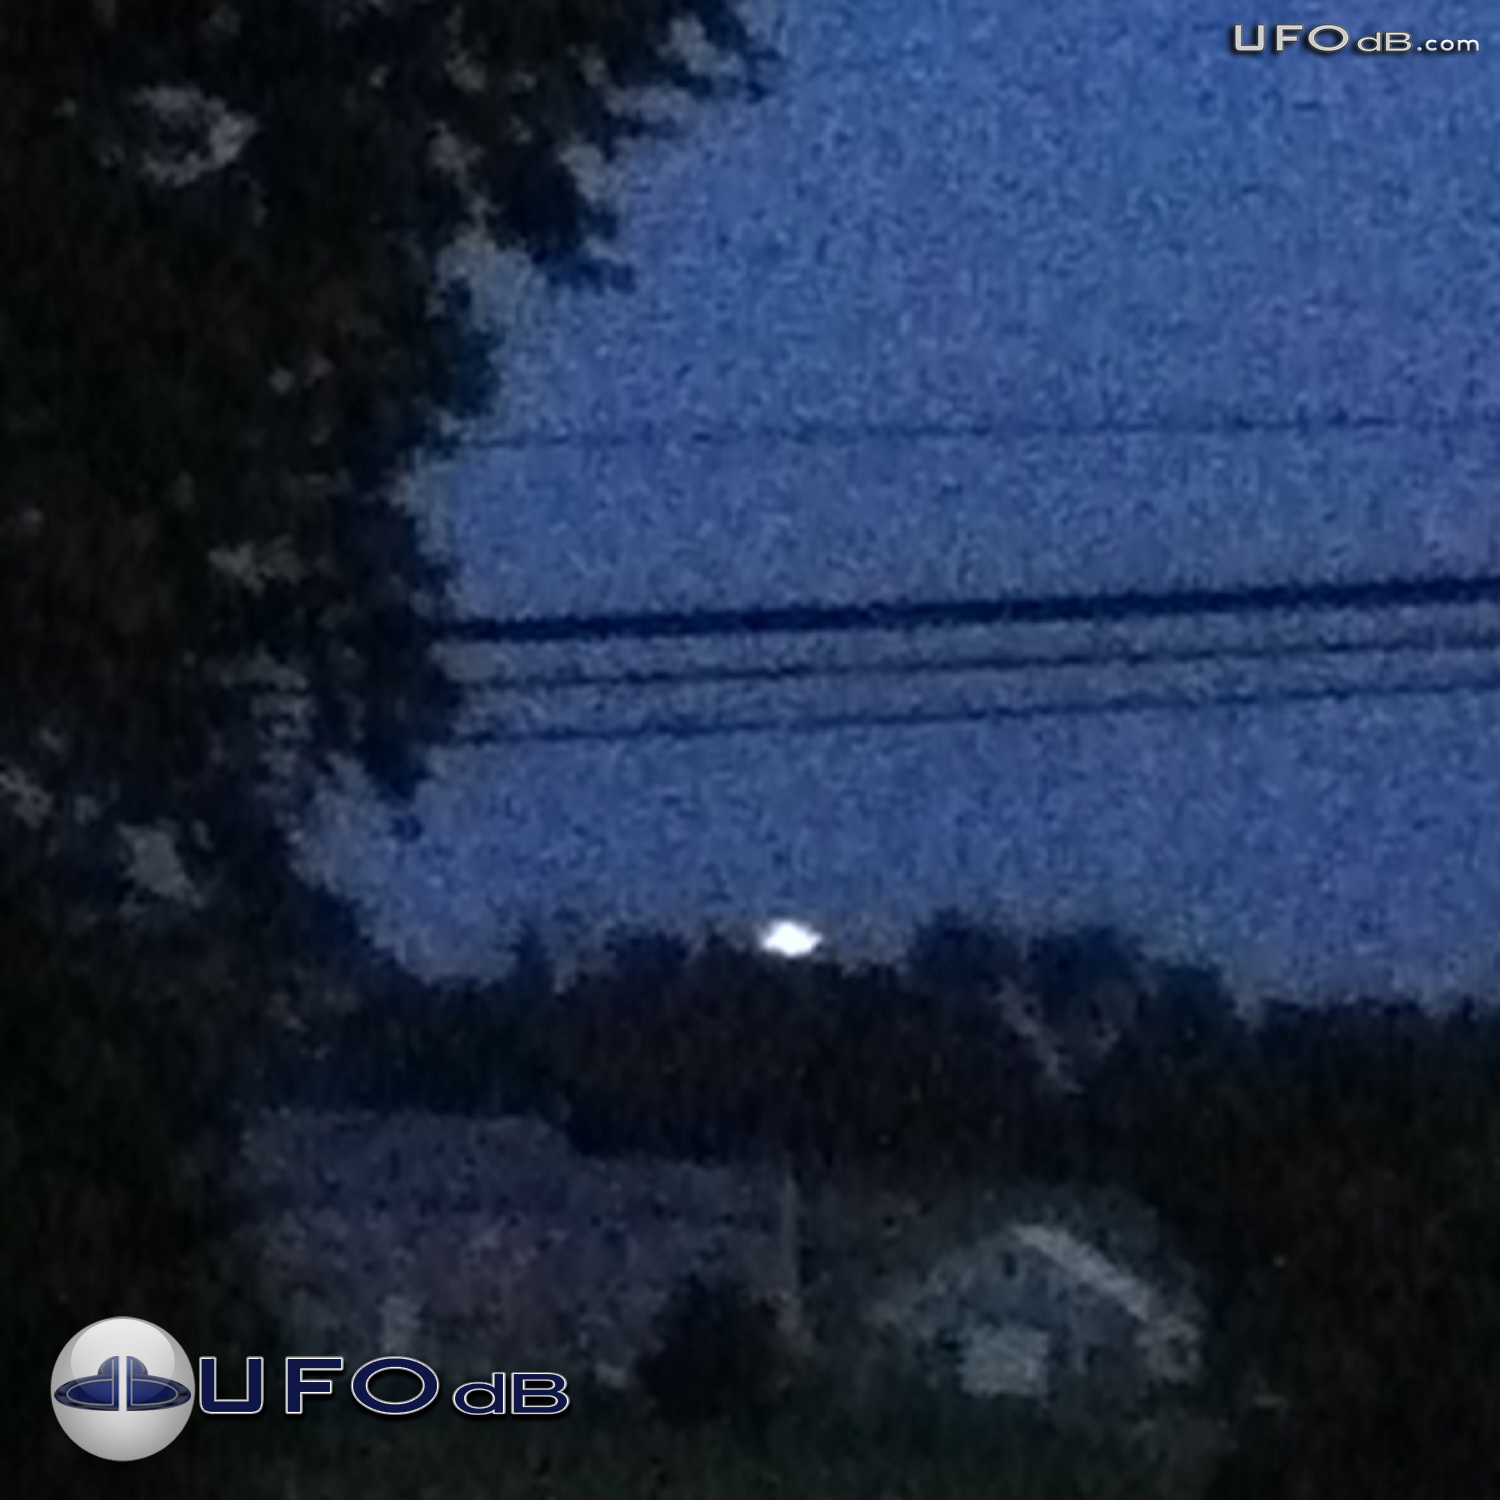 Maryland, USA | UFO seen from Walkersville and Thurmont | June 6 2011 UFO Picture #342-1